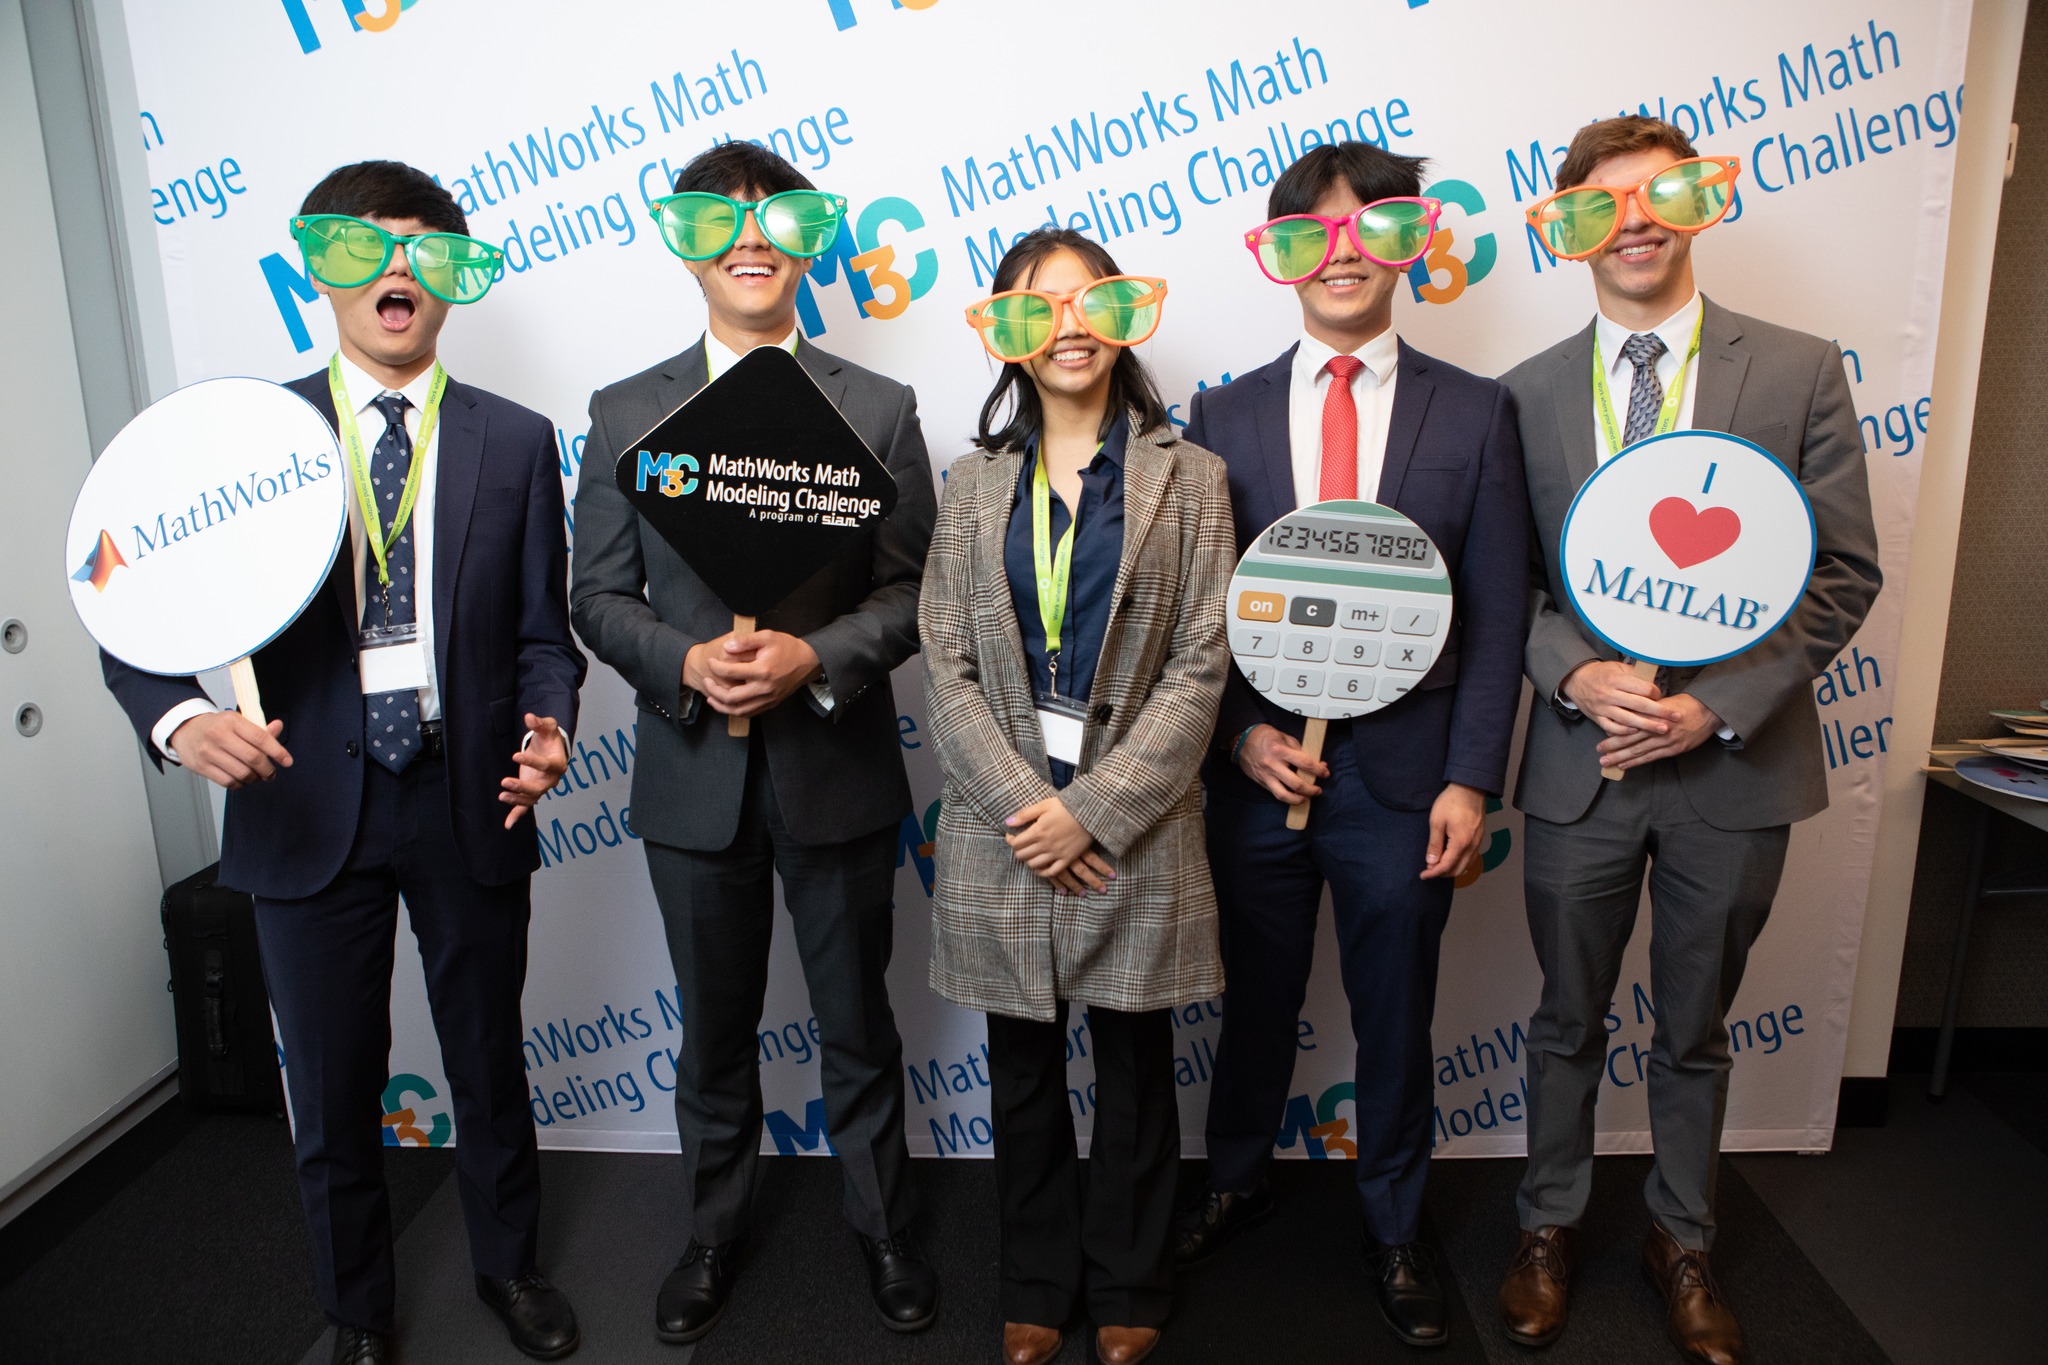 Five students posing in front of a photo wall wearing silly glasses and holding MathWorks props